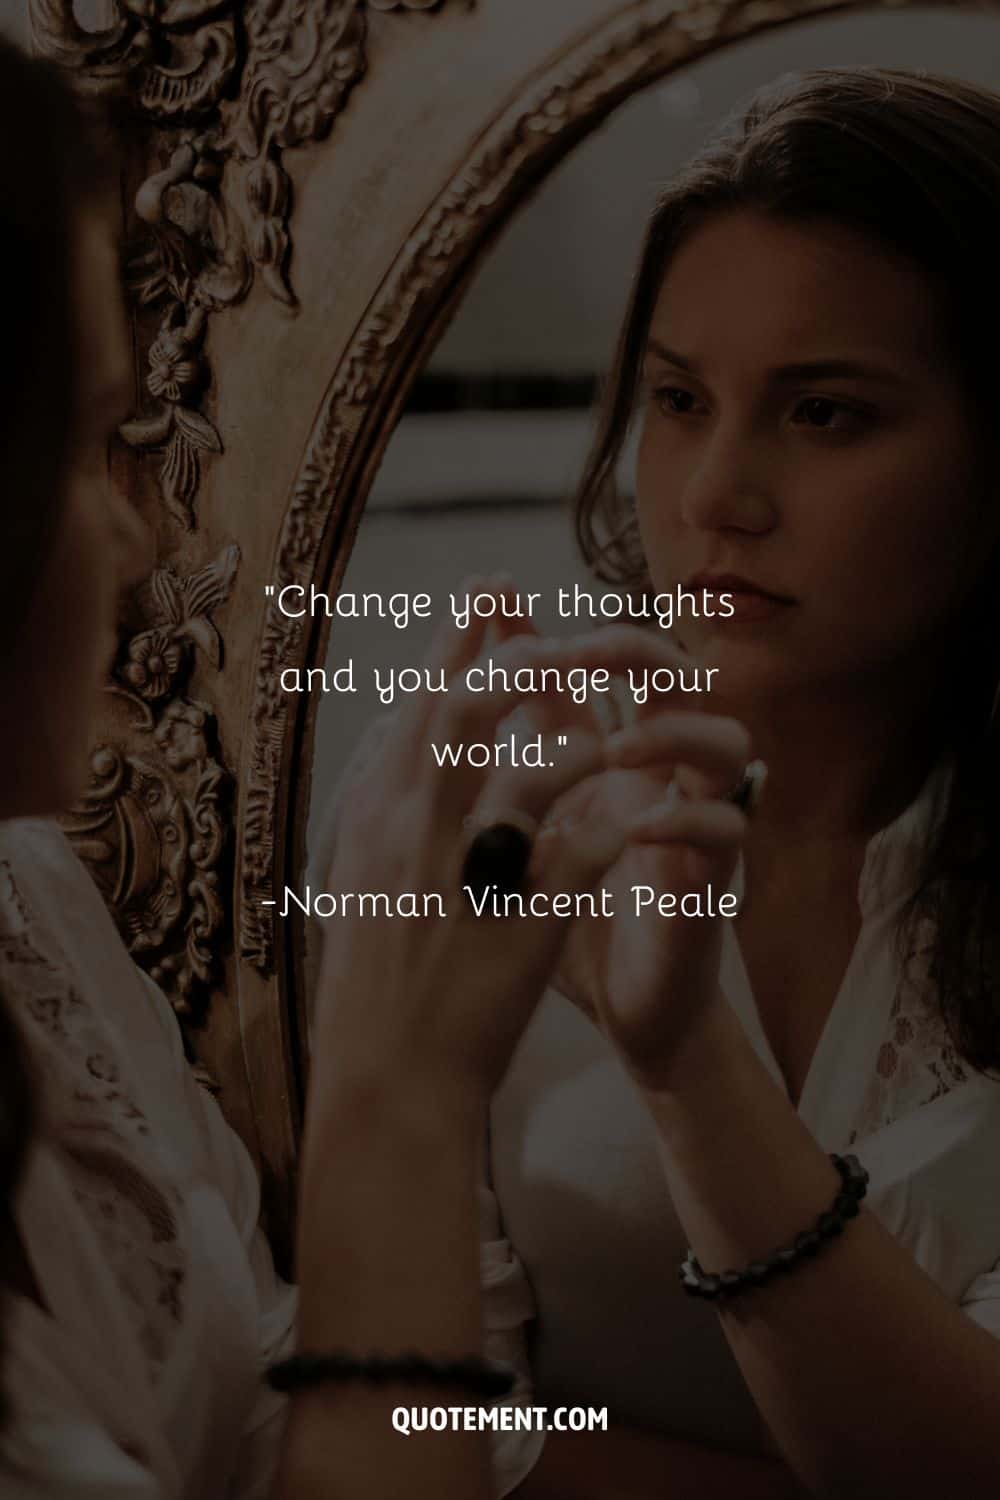 Change your thoughts and you change your world. – Norman Vincent Peale